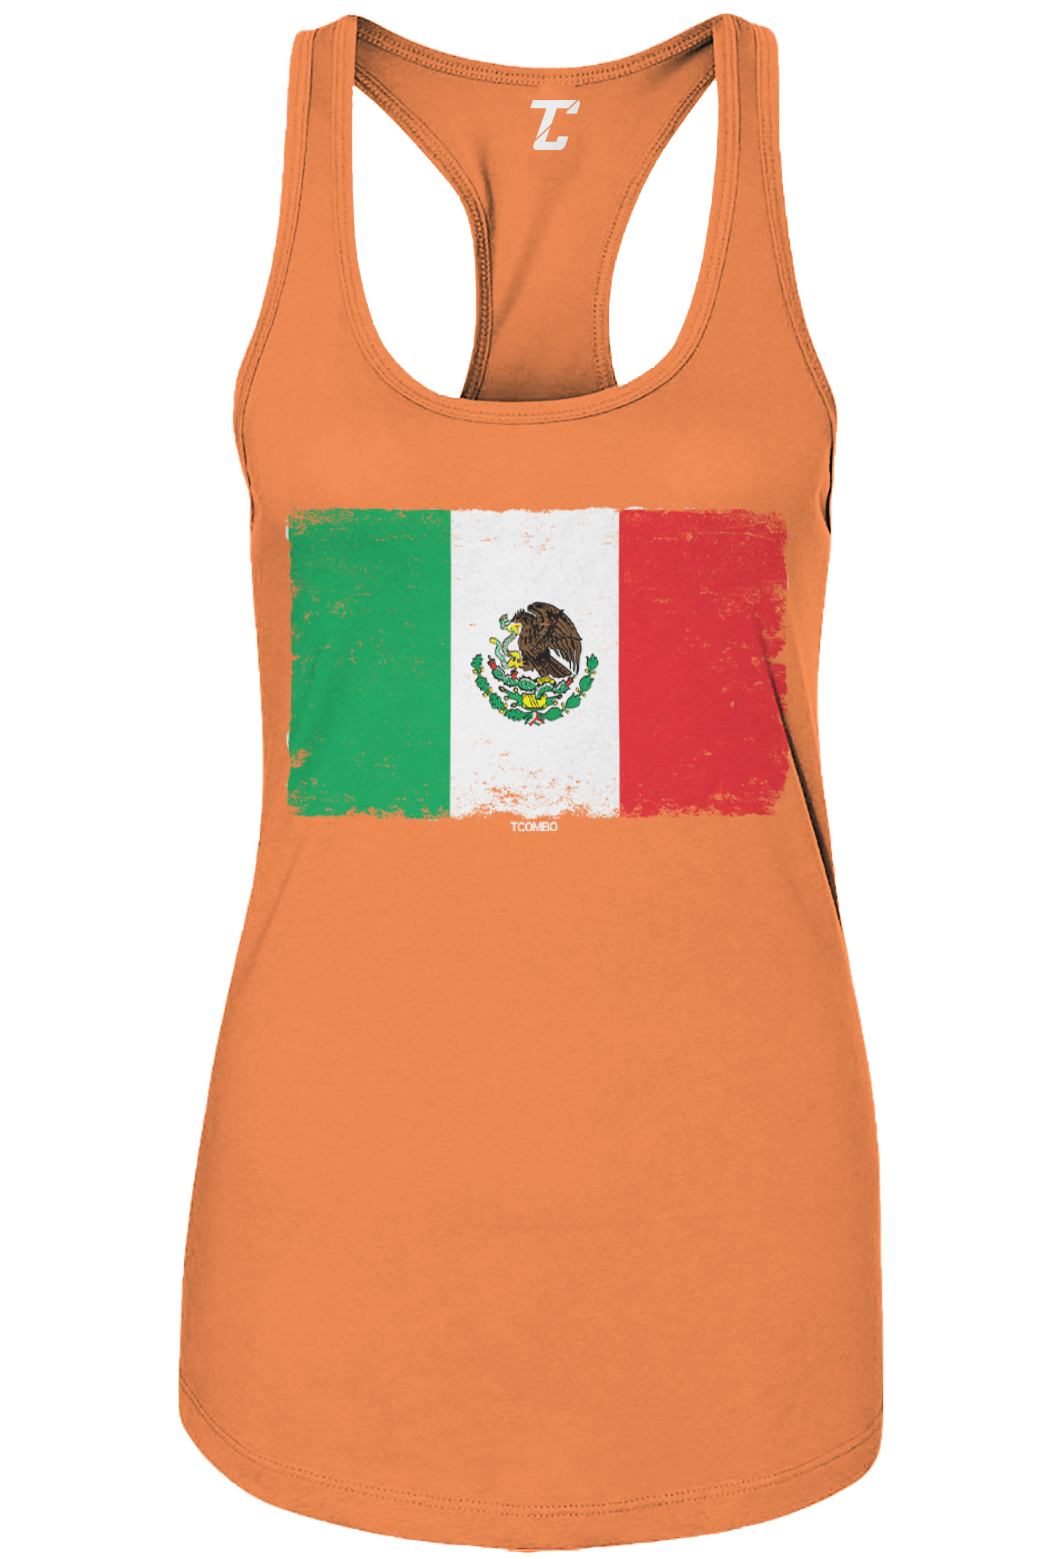 Proud American With Mexican Roots Tank Top American Mexican Flag Tanks for Women 4th of July Tank Top Mexican Women Independence Day Gifts